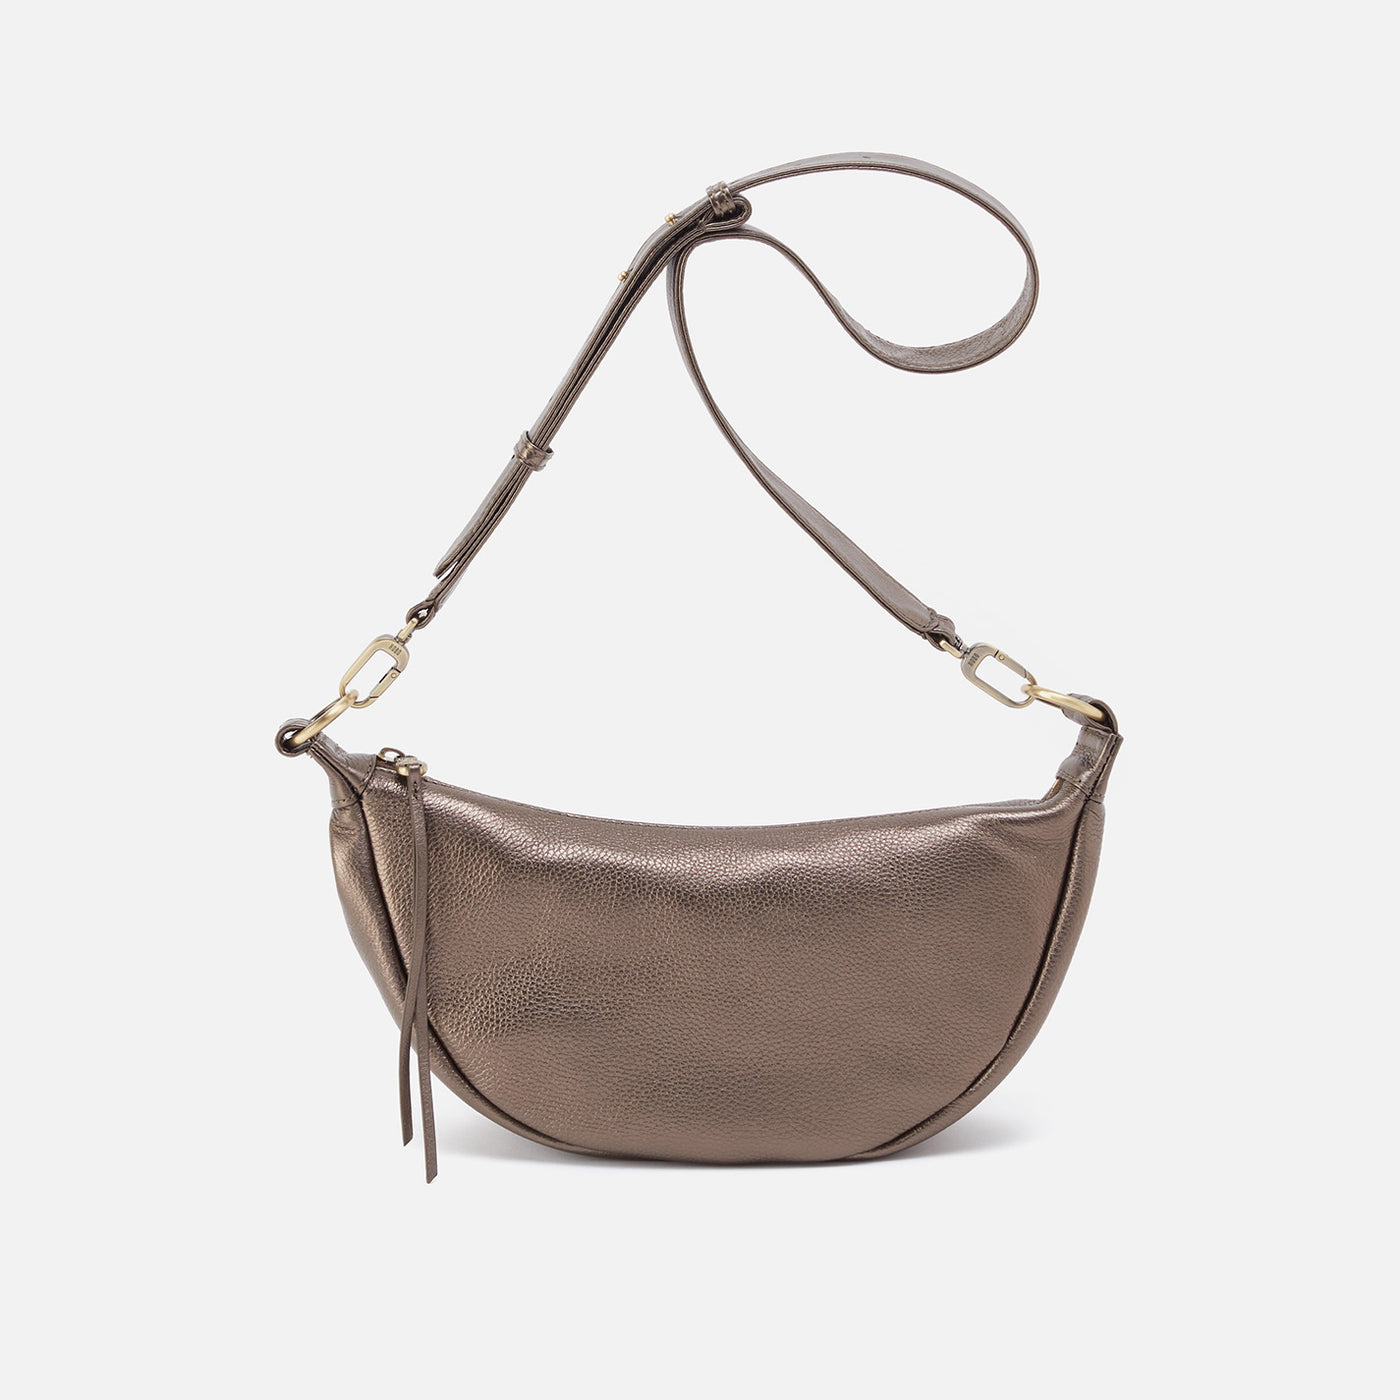 Knox Sling in Pebbled Metallic Leather - Pewter